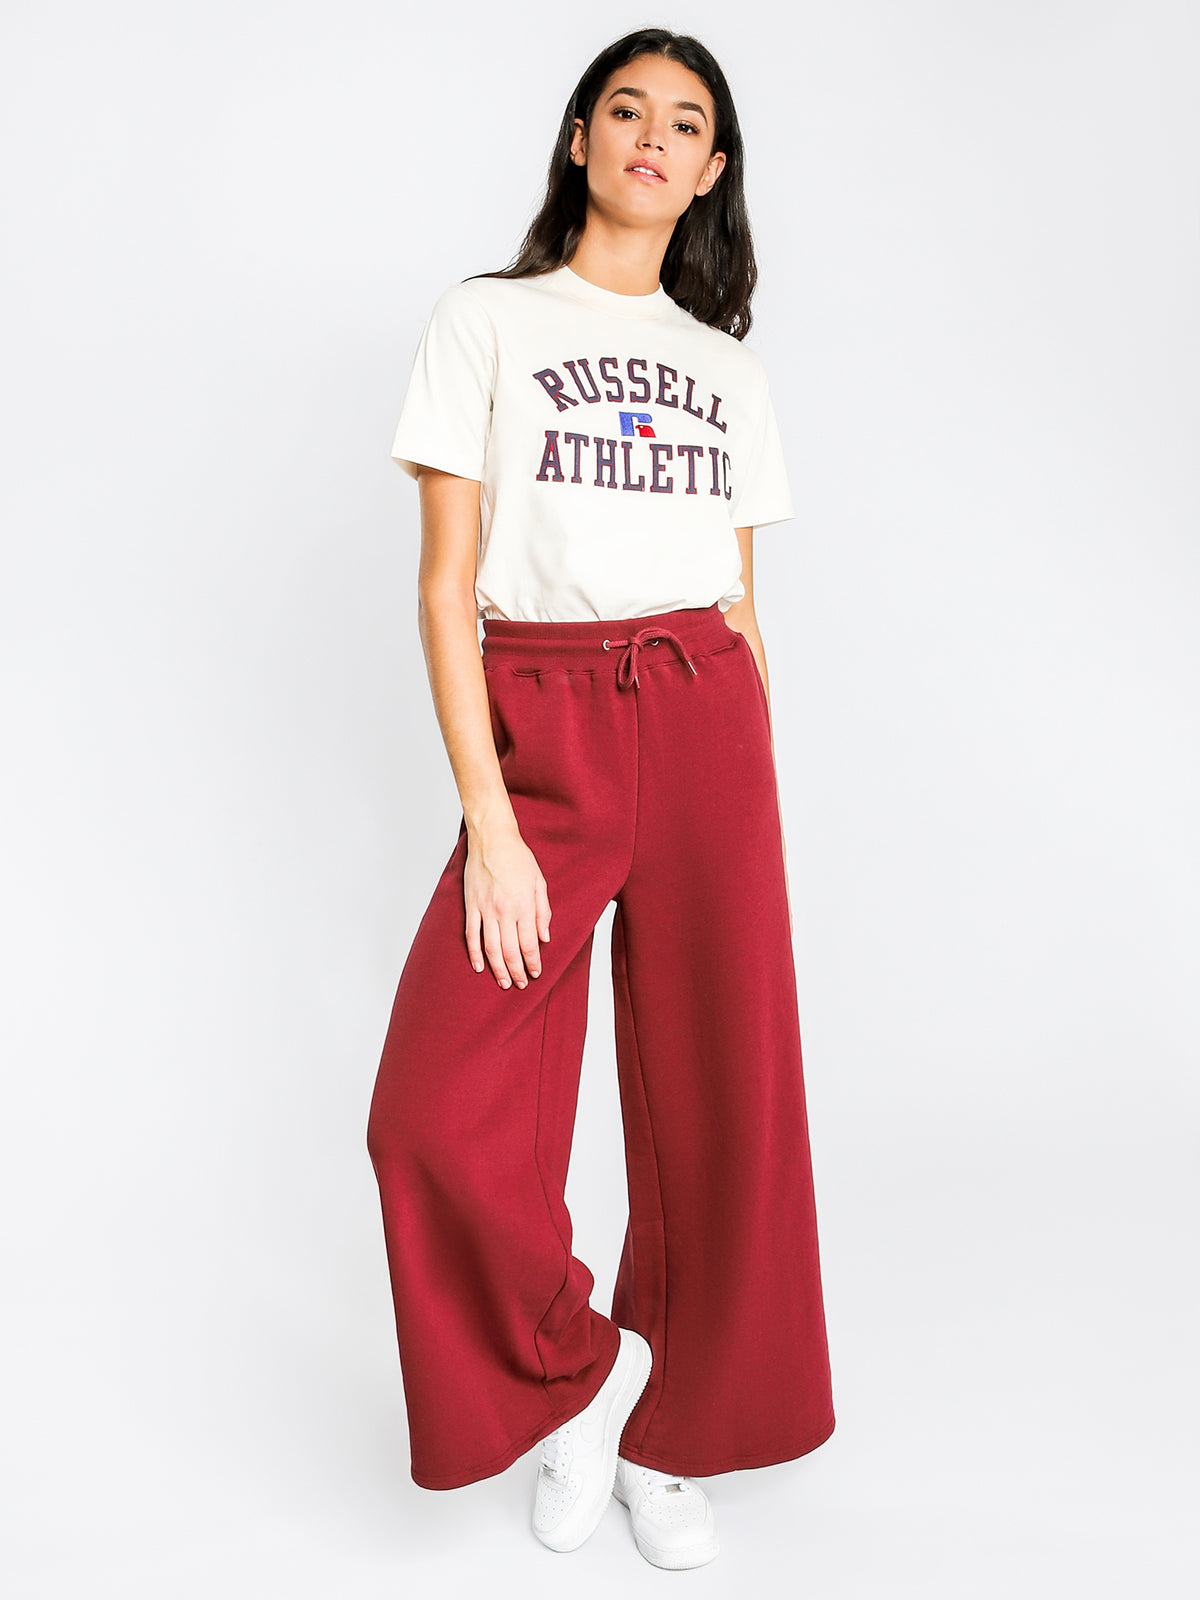 Evelyn Wide Track Pants in Burgundy